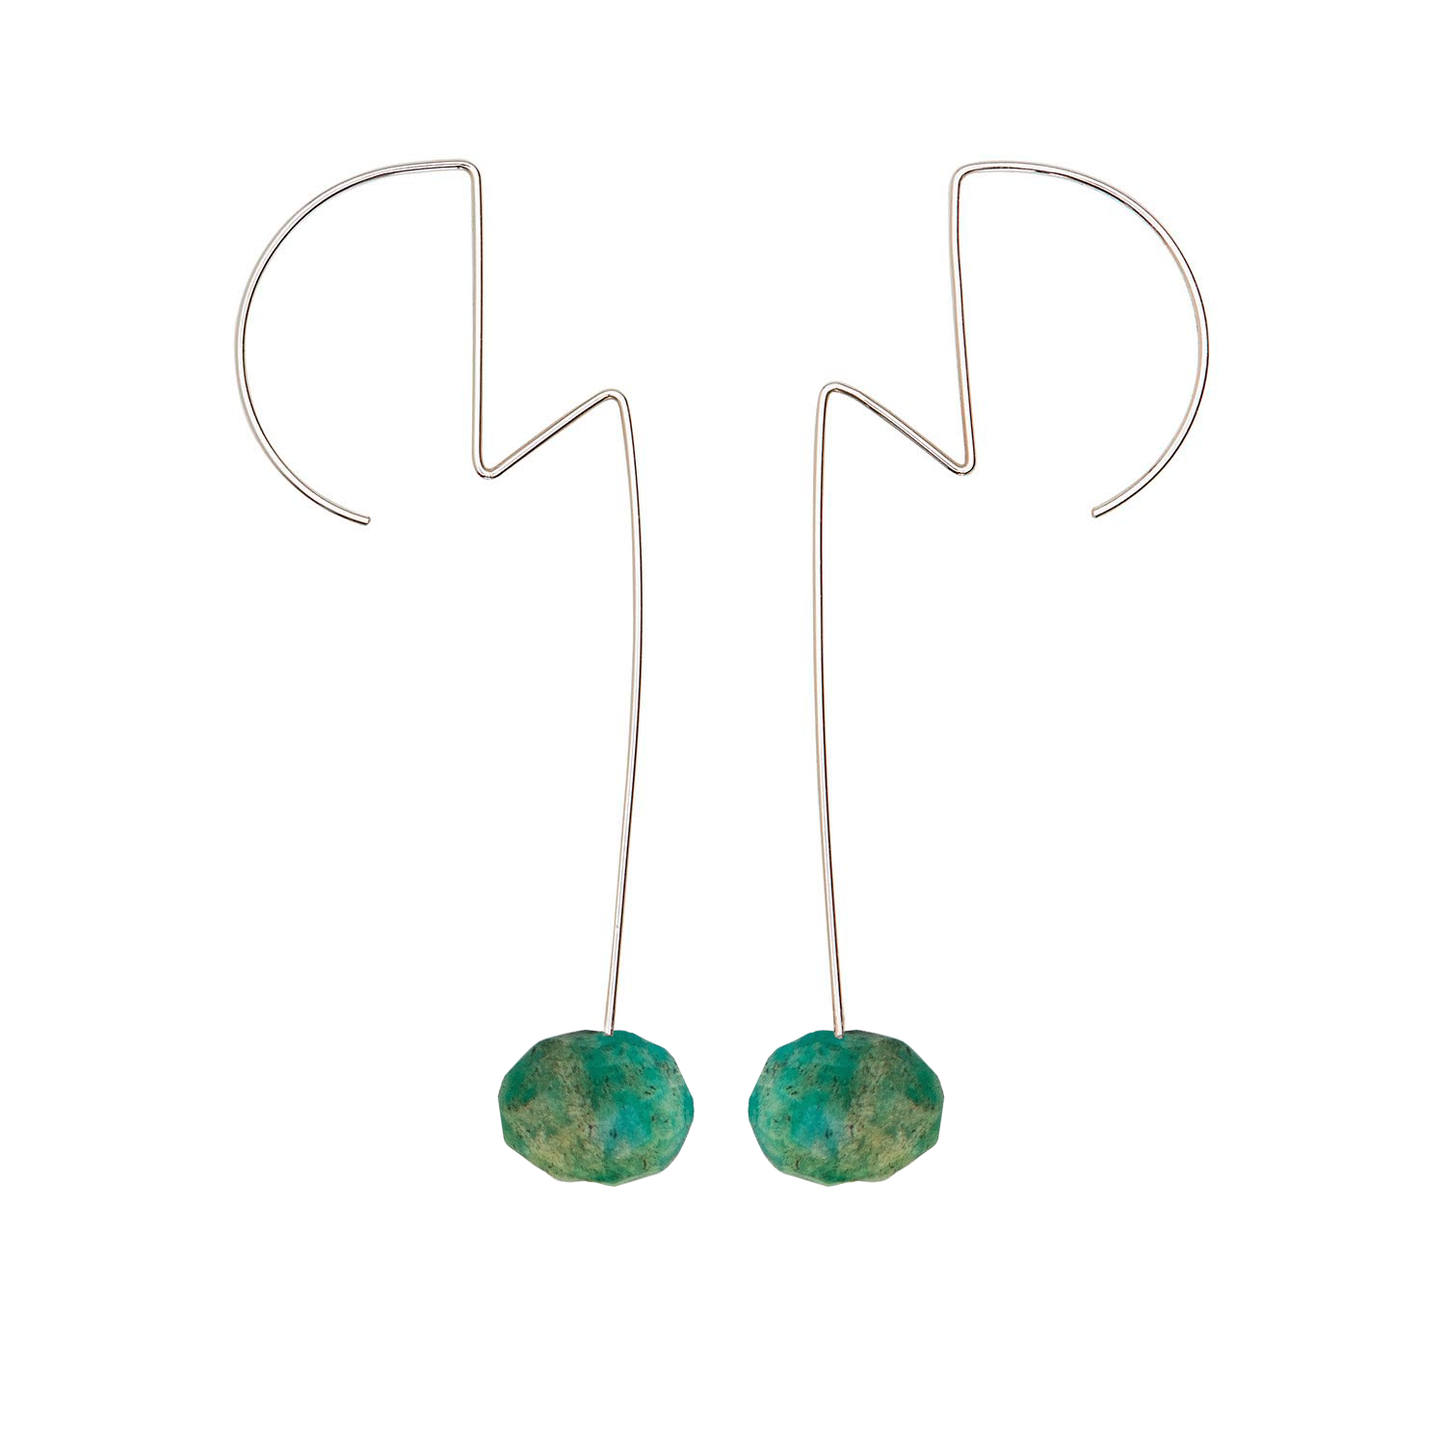 Round Ziggy Stardust inspired Earrings with hand-cut precious gems